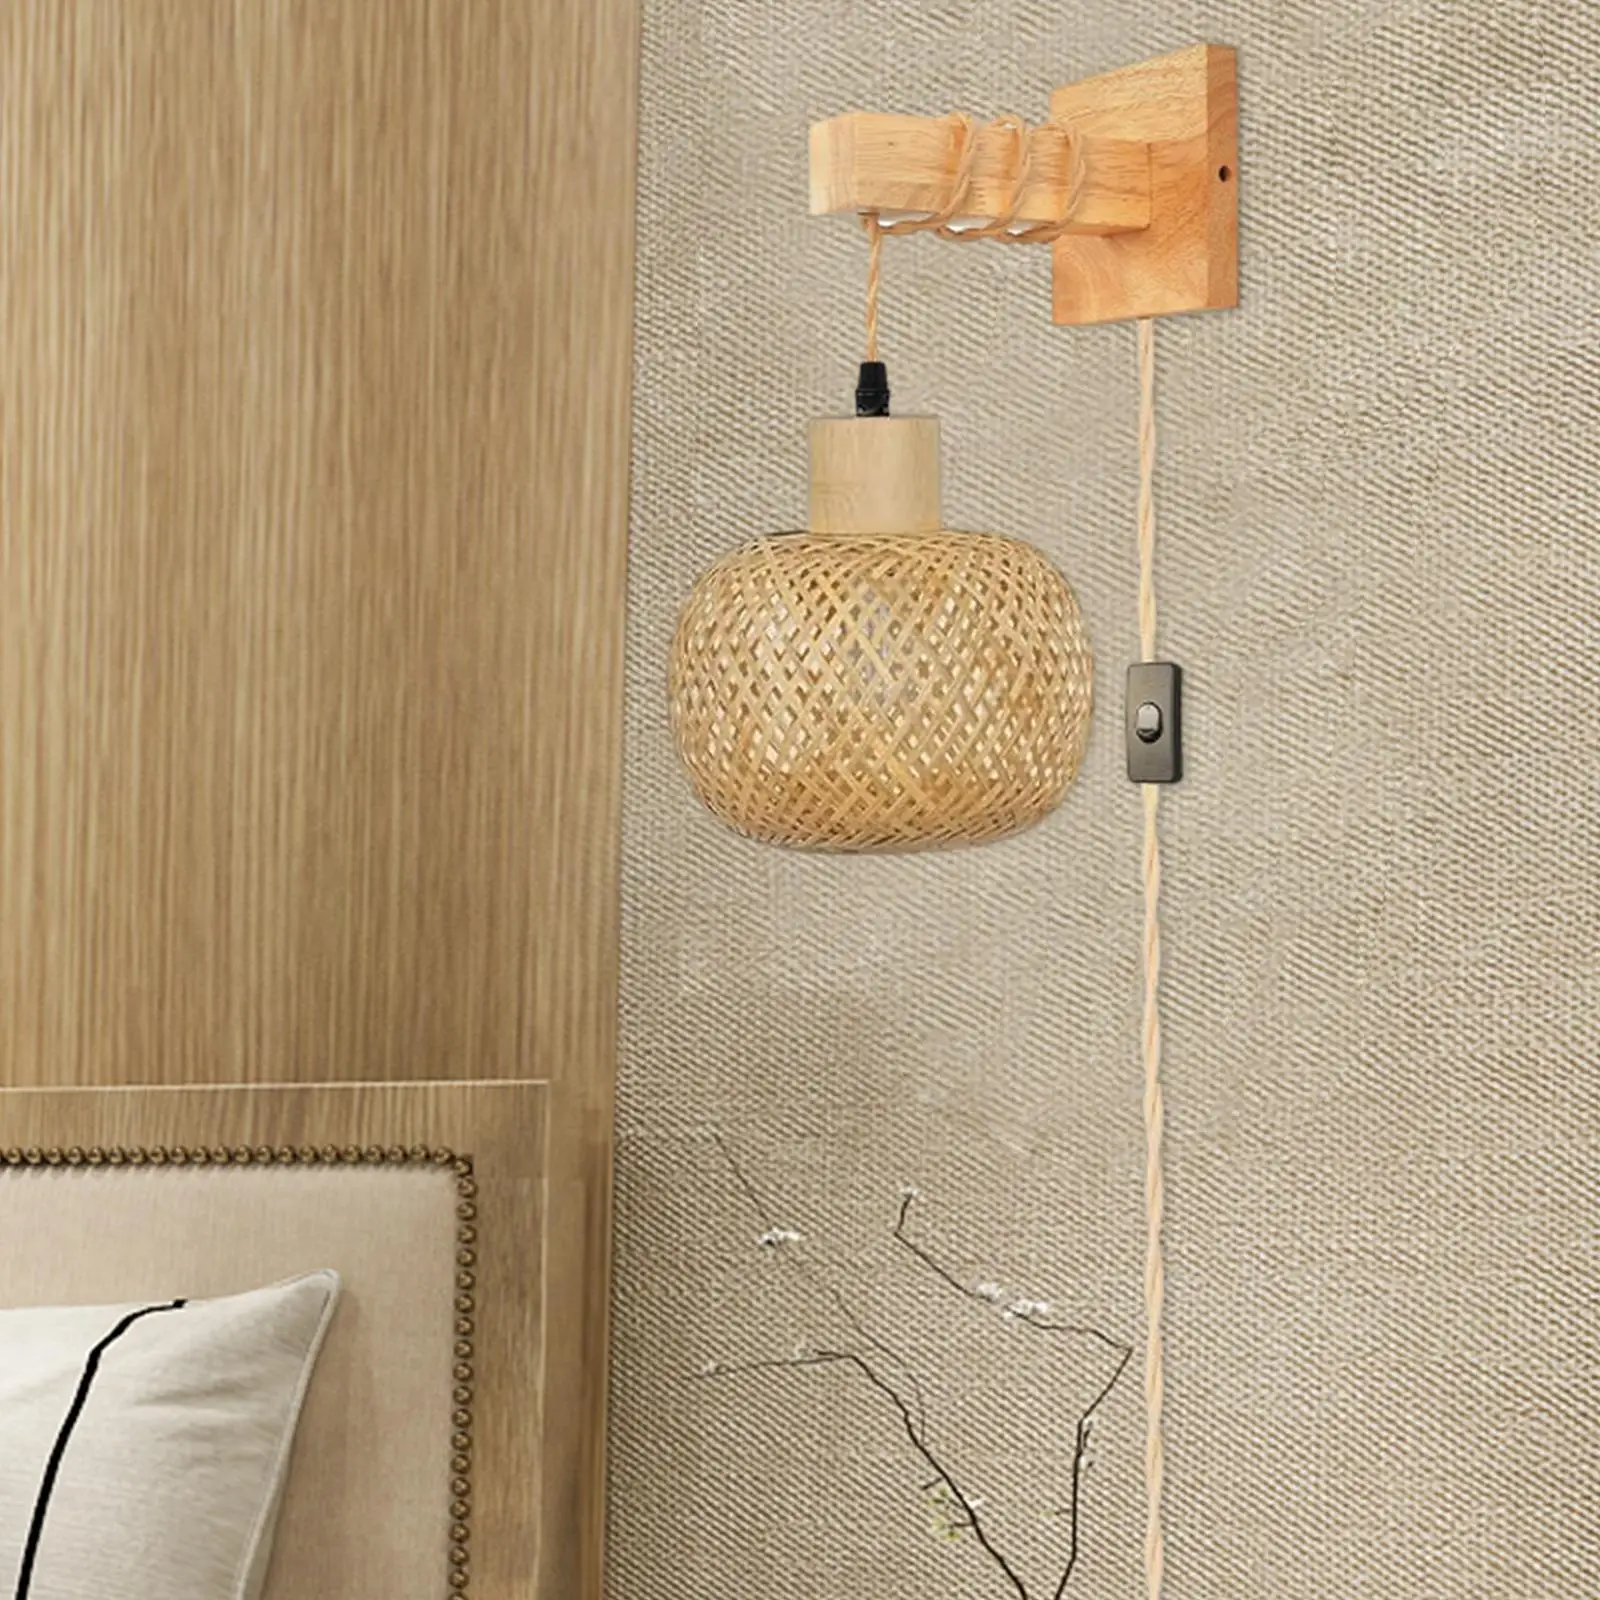 Bamboo Wall Sconce Decorative Bedside Light Fixture Farmhouse Hanging Lamp for Reading Farmhouse Bathroom Home Living Room